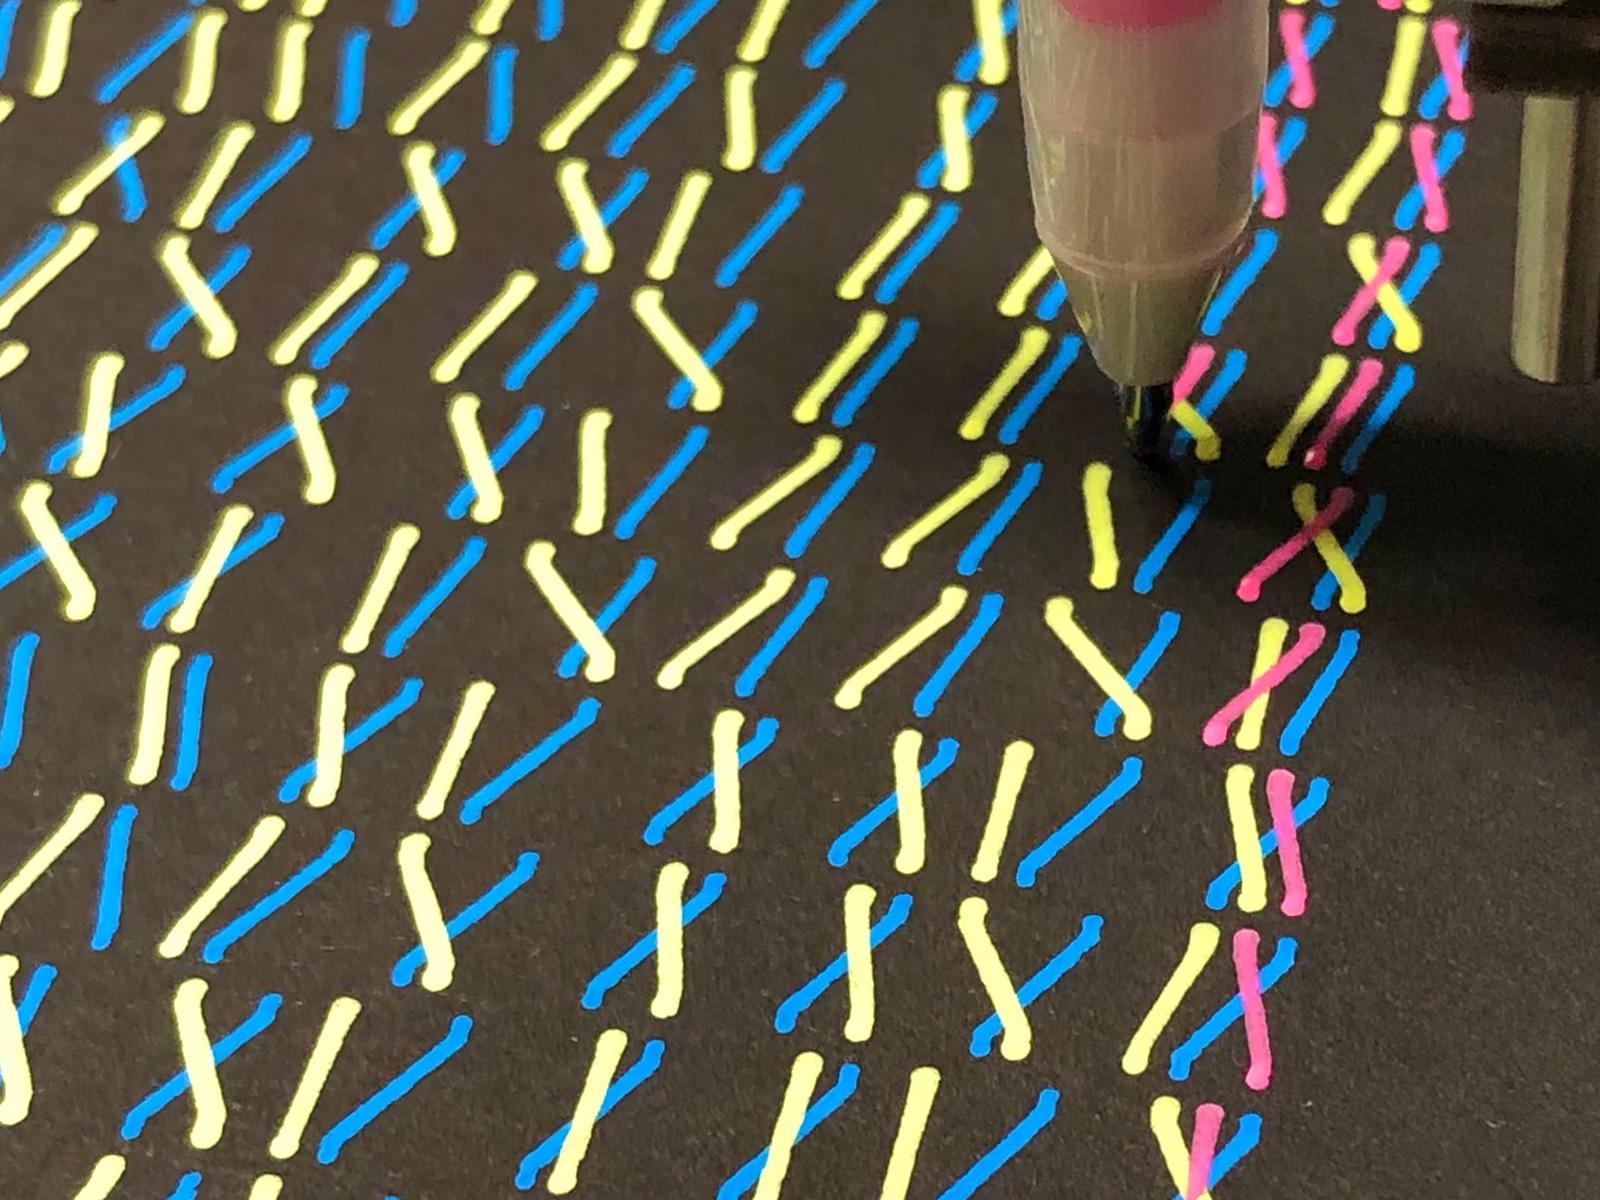 Printing in progress - the yellow and blue wires are complete, pink is being drawn